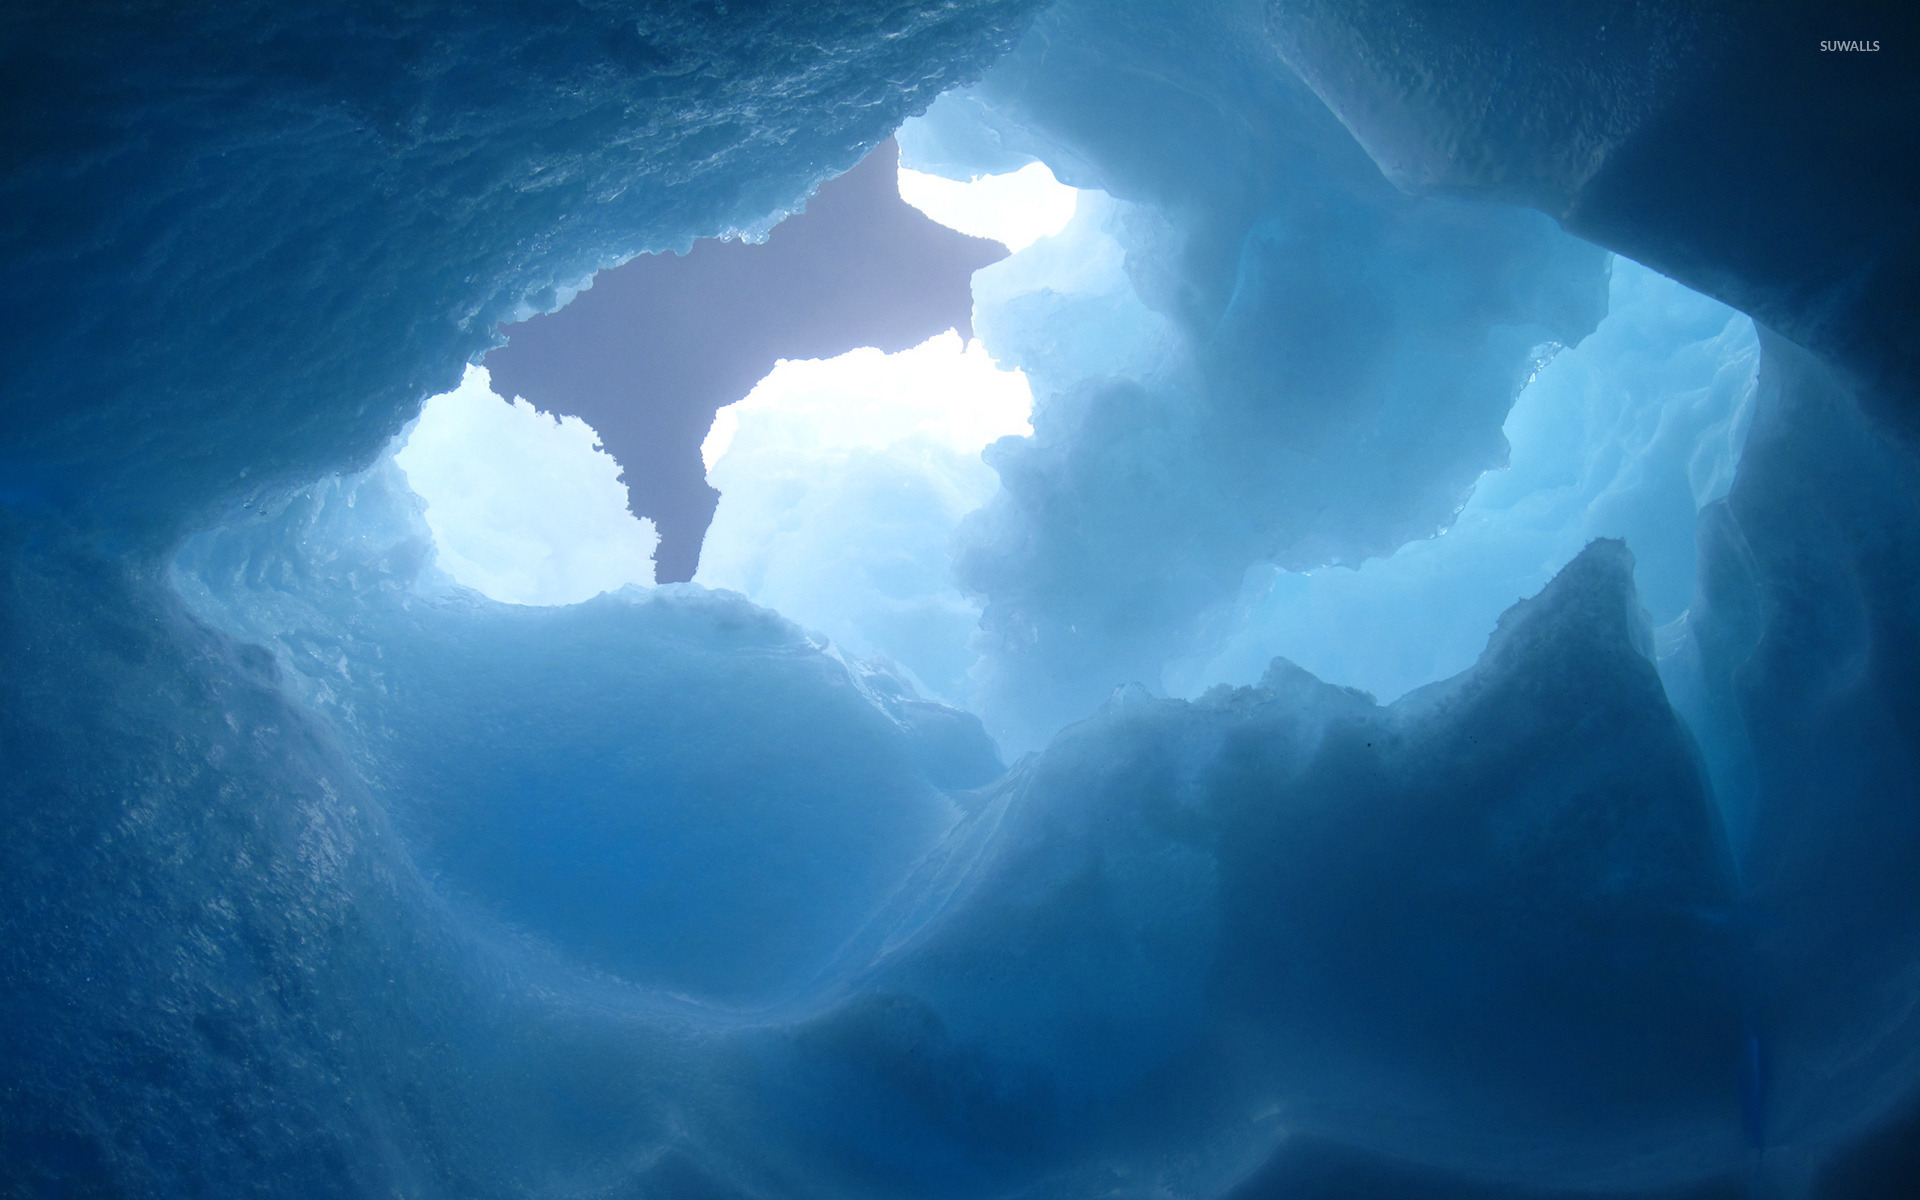 Ice cave wallpaper   Nature wallpapers   31856